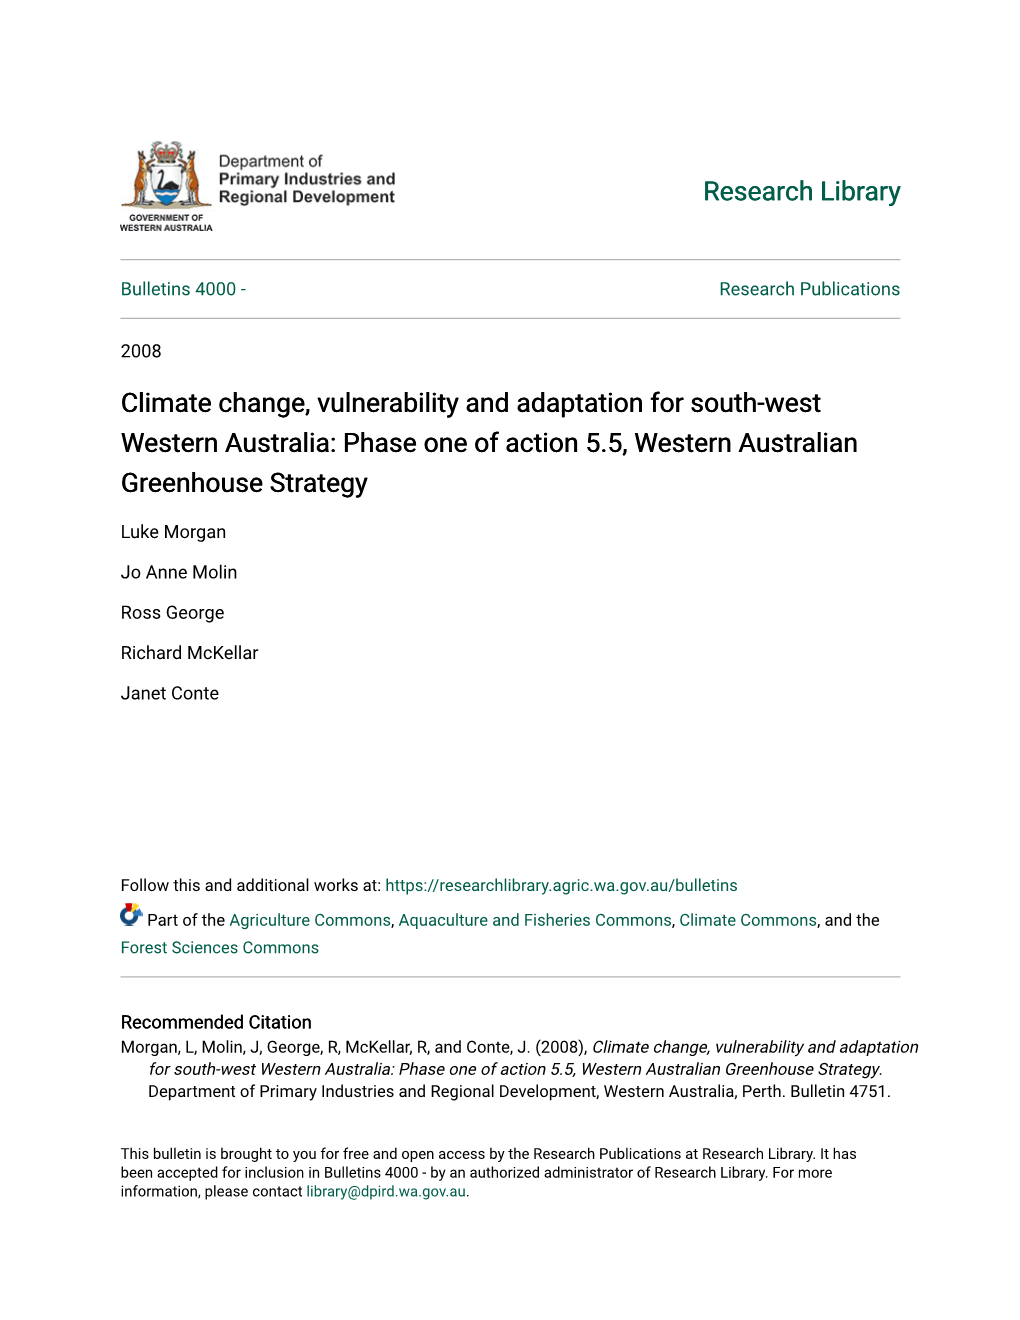 Climate Change, Vulnerability and Adaptation for South-West Western Australia: Phase One of Action 5.5, Western Australian Greenhouse Strategy